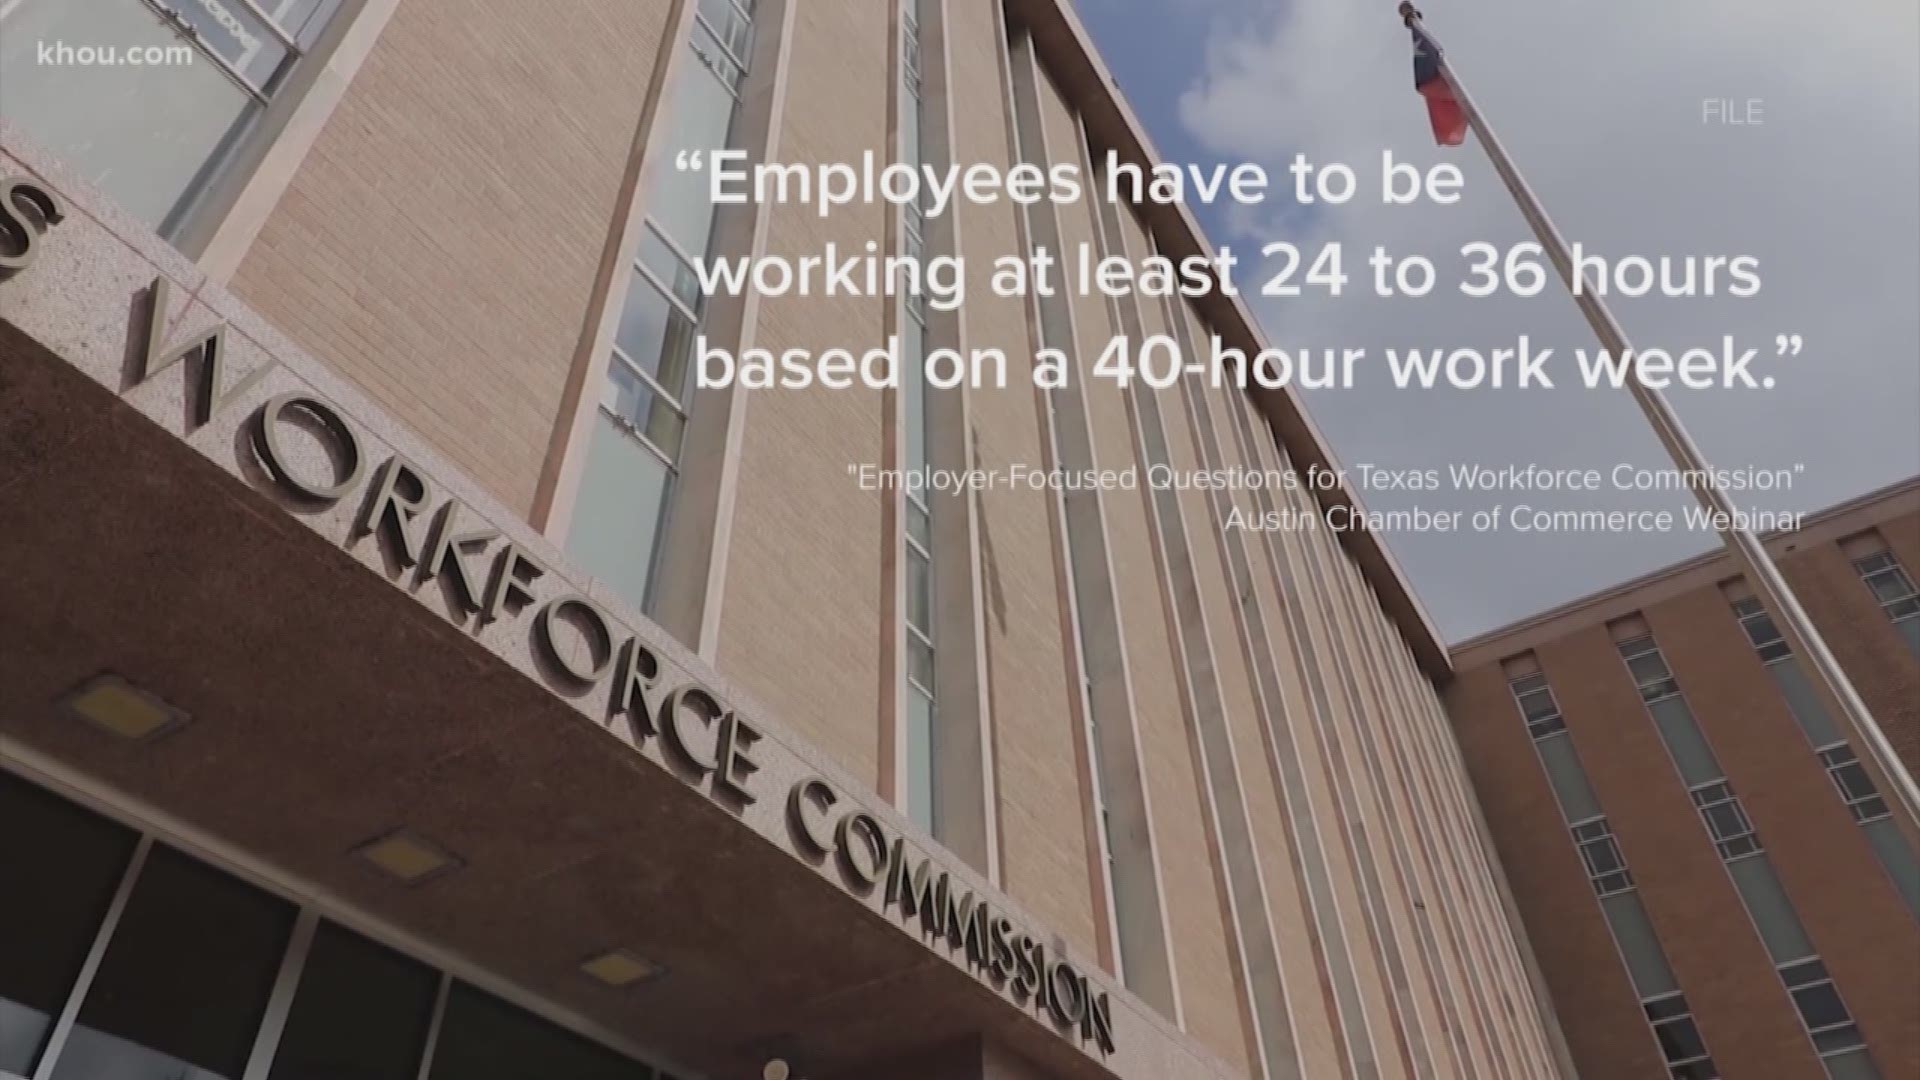 Here's a look at some of the items discussed in the "Employer-Focused Questions for Texas Workforce Commission” webinar hosted by the Austin Chamber of Commerce.